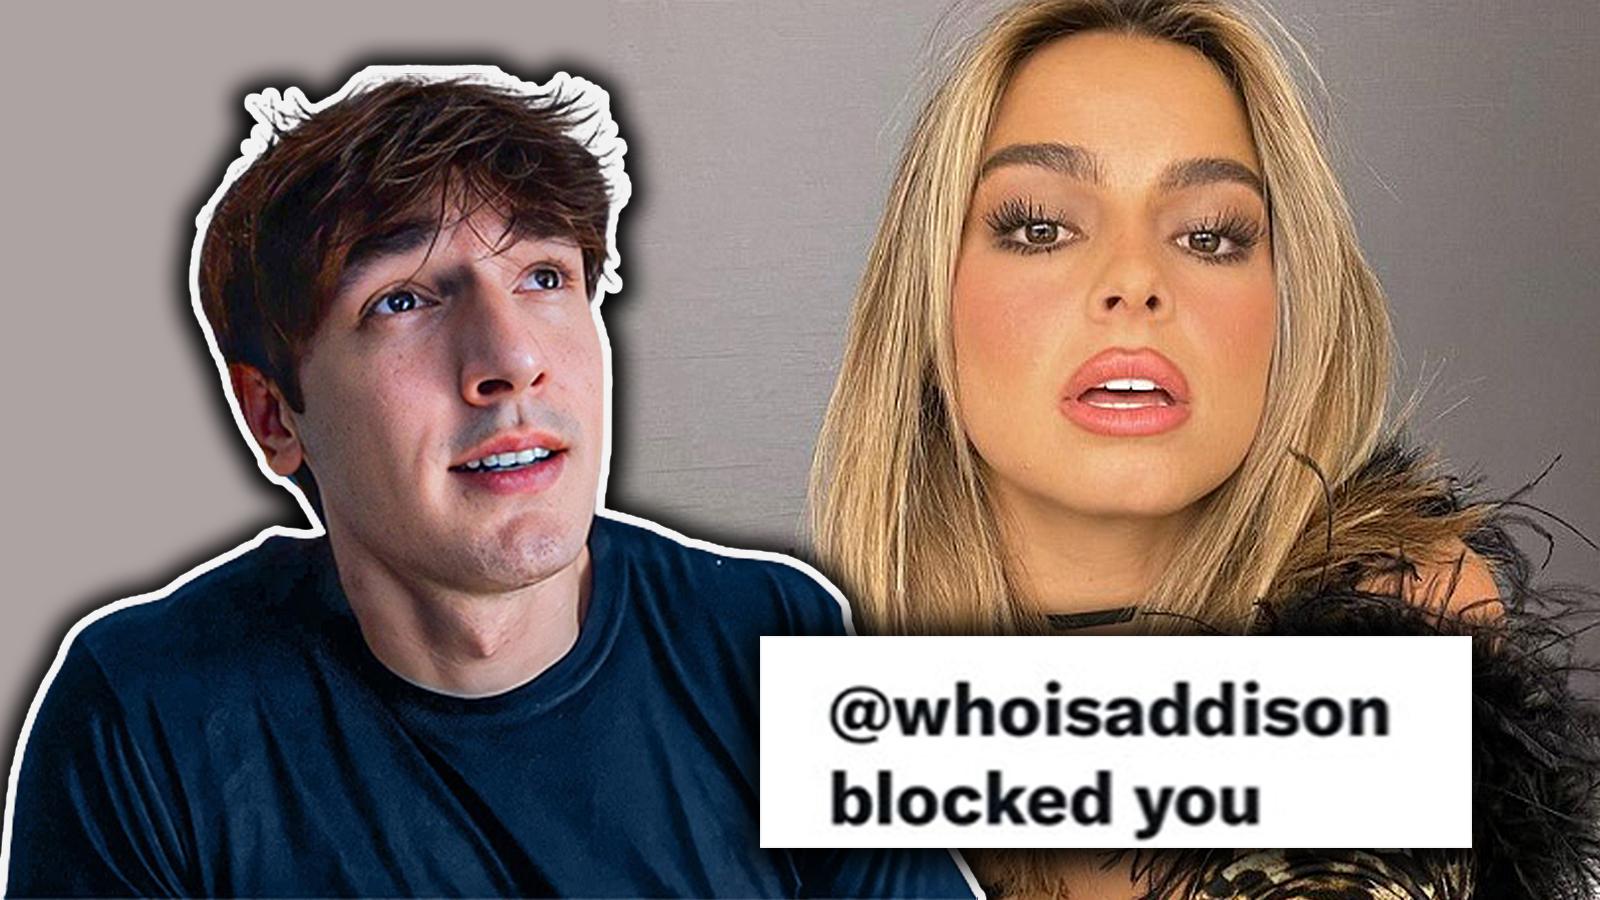 Bryce Hall reacts to Addison Rae blocking him on Twitter